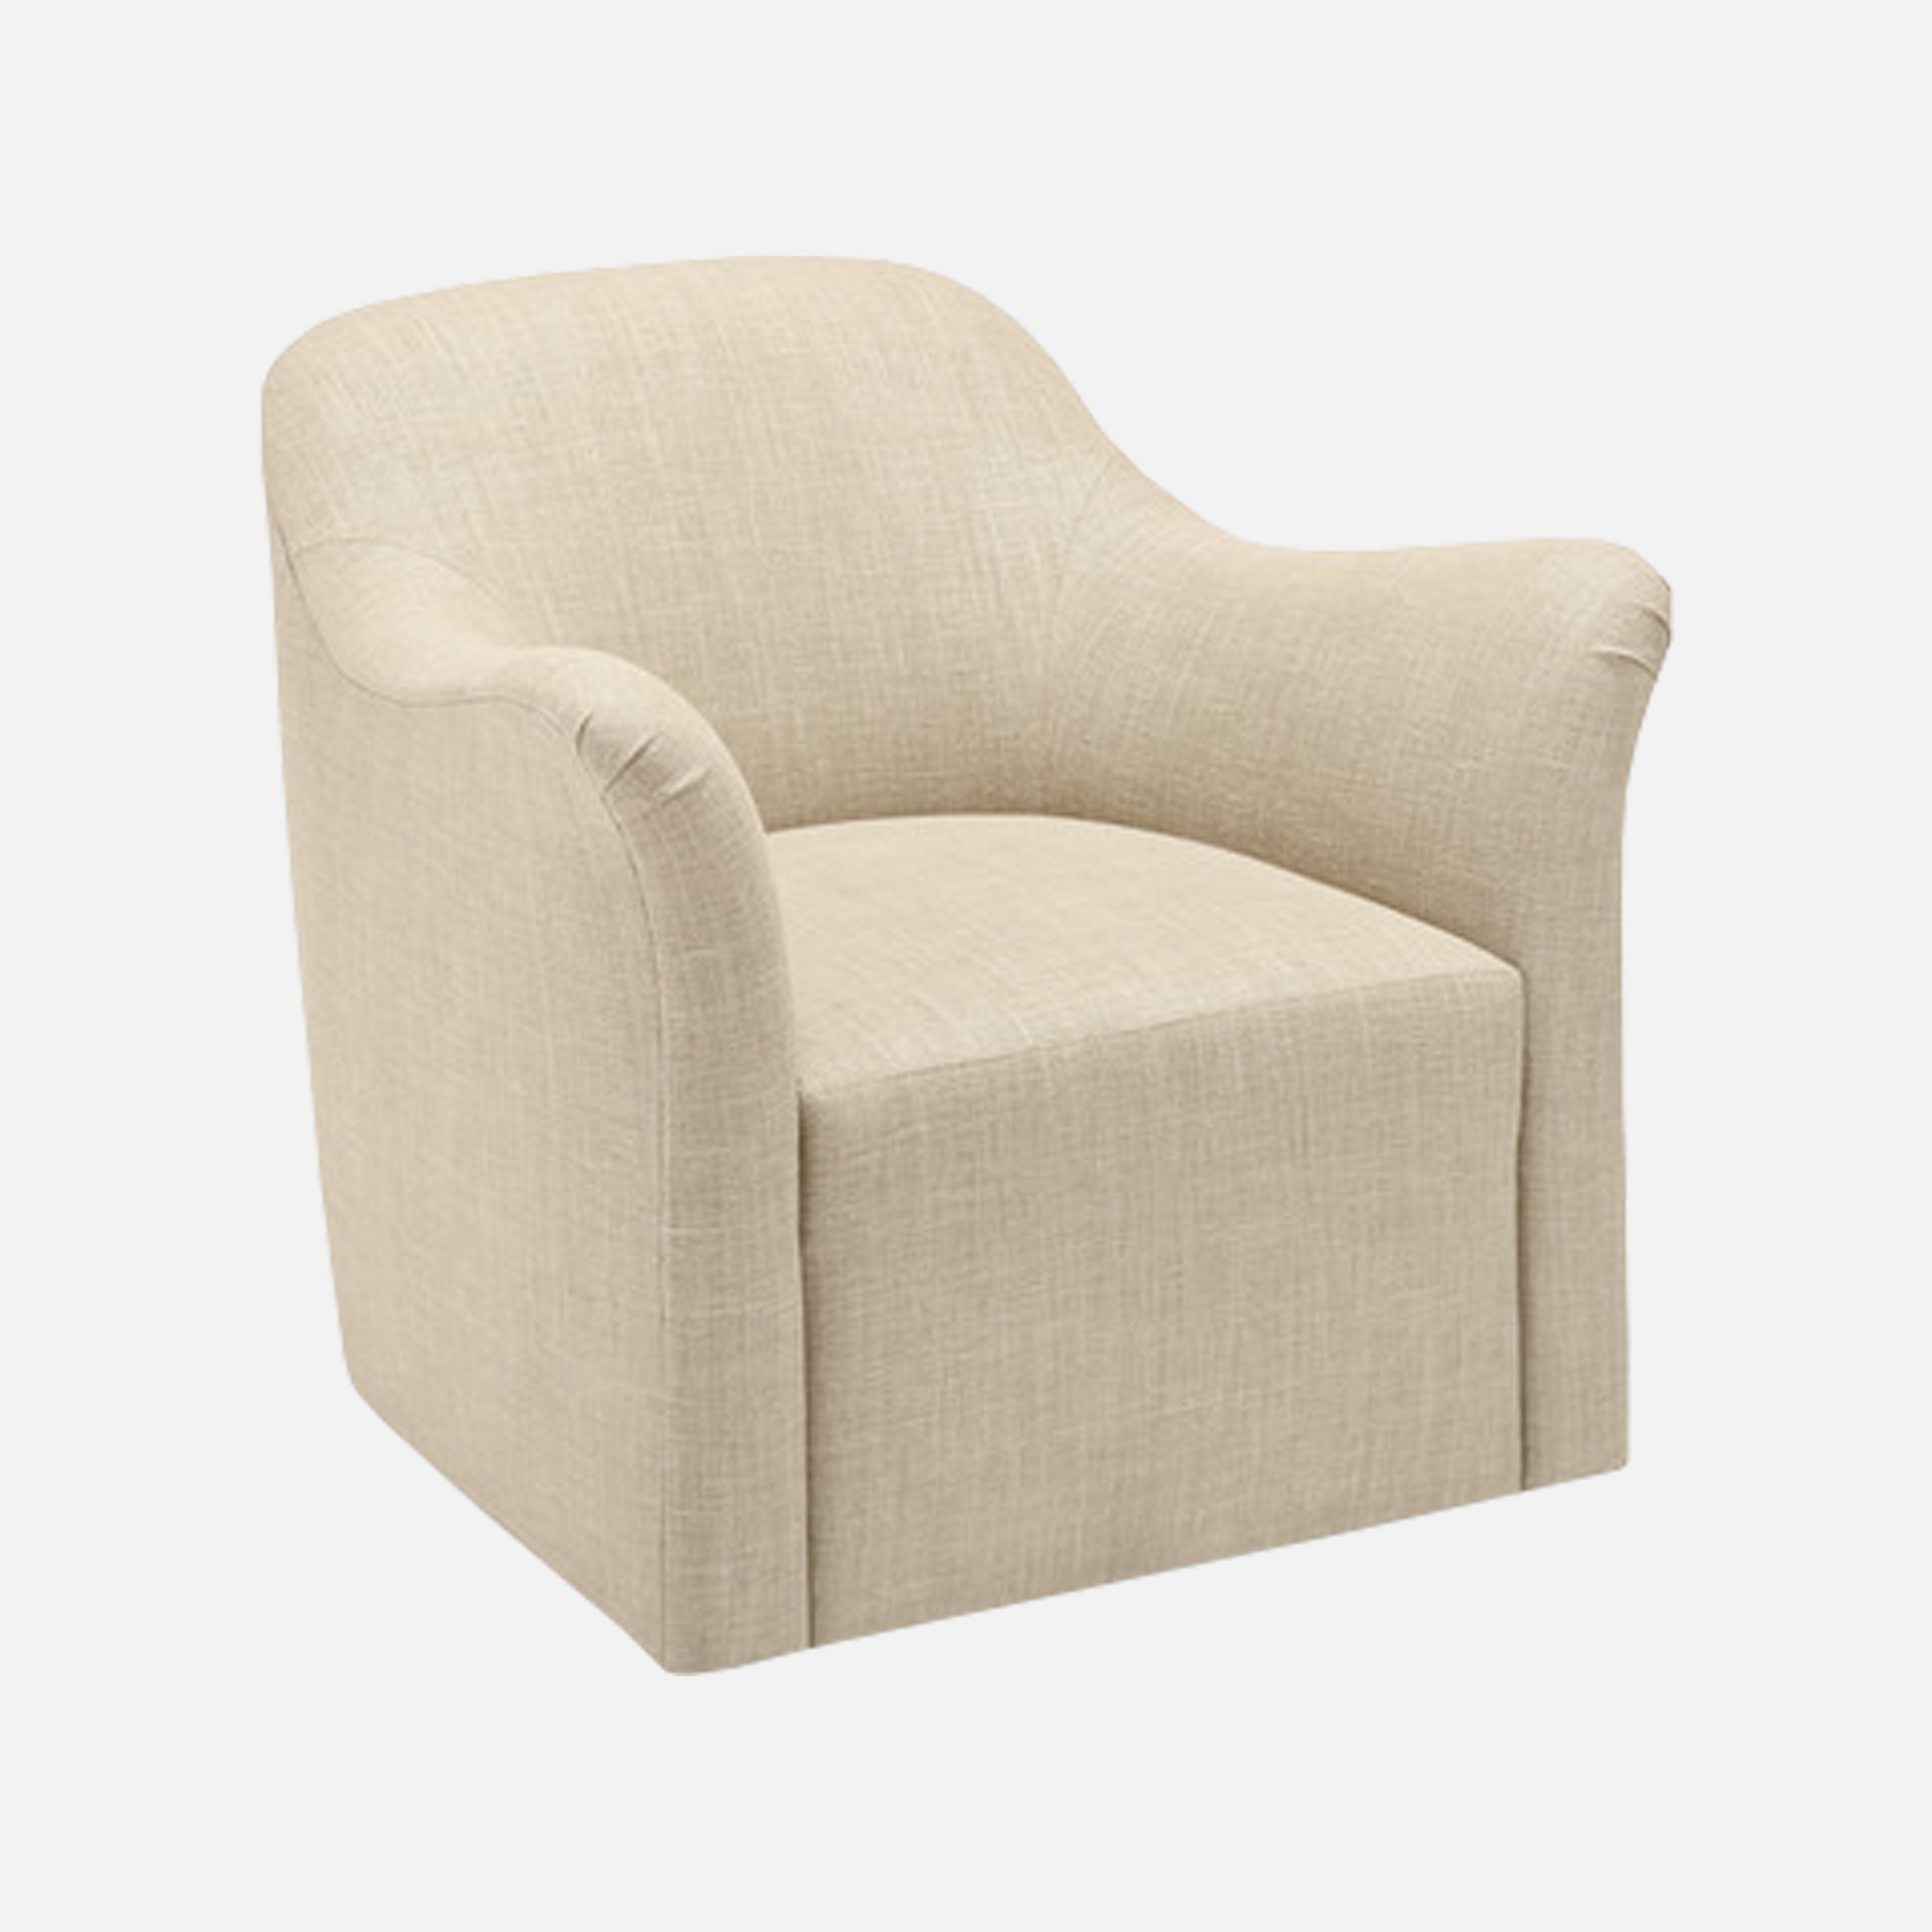 The image of an Gregorius Pineo Hadley Lounge Chair product